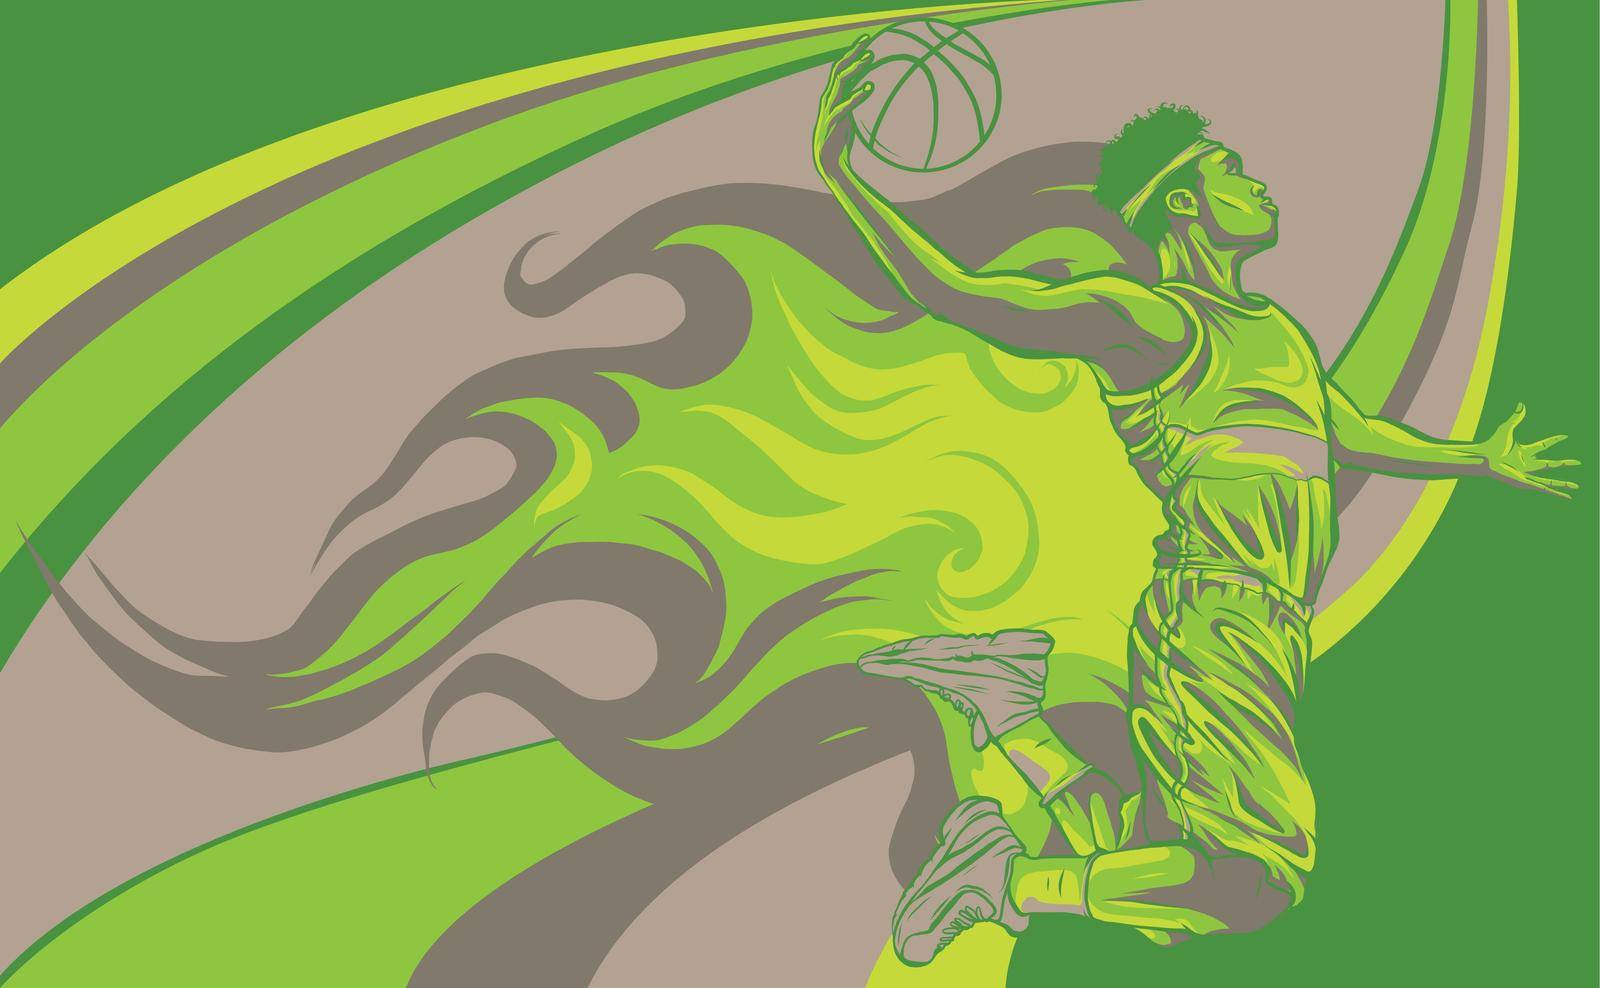 cartoon basketball player is moving dribble with flames by dean